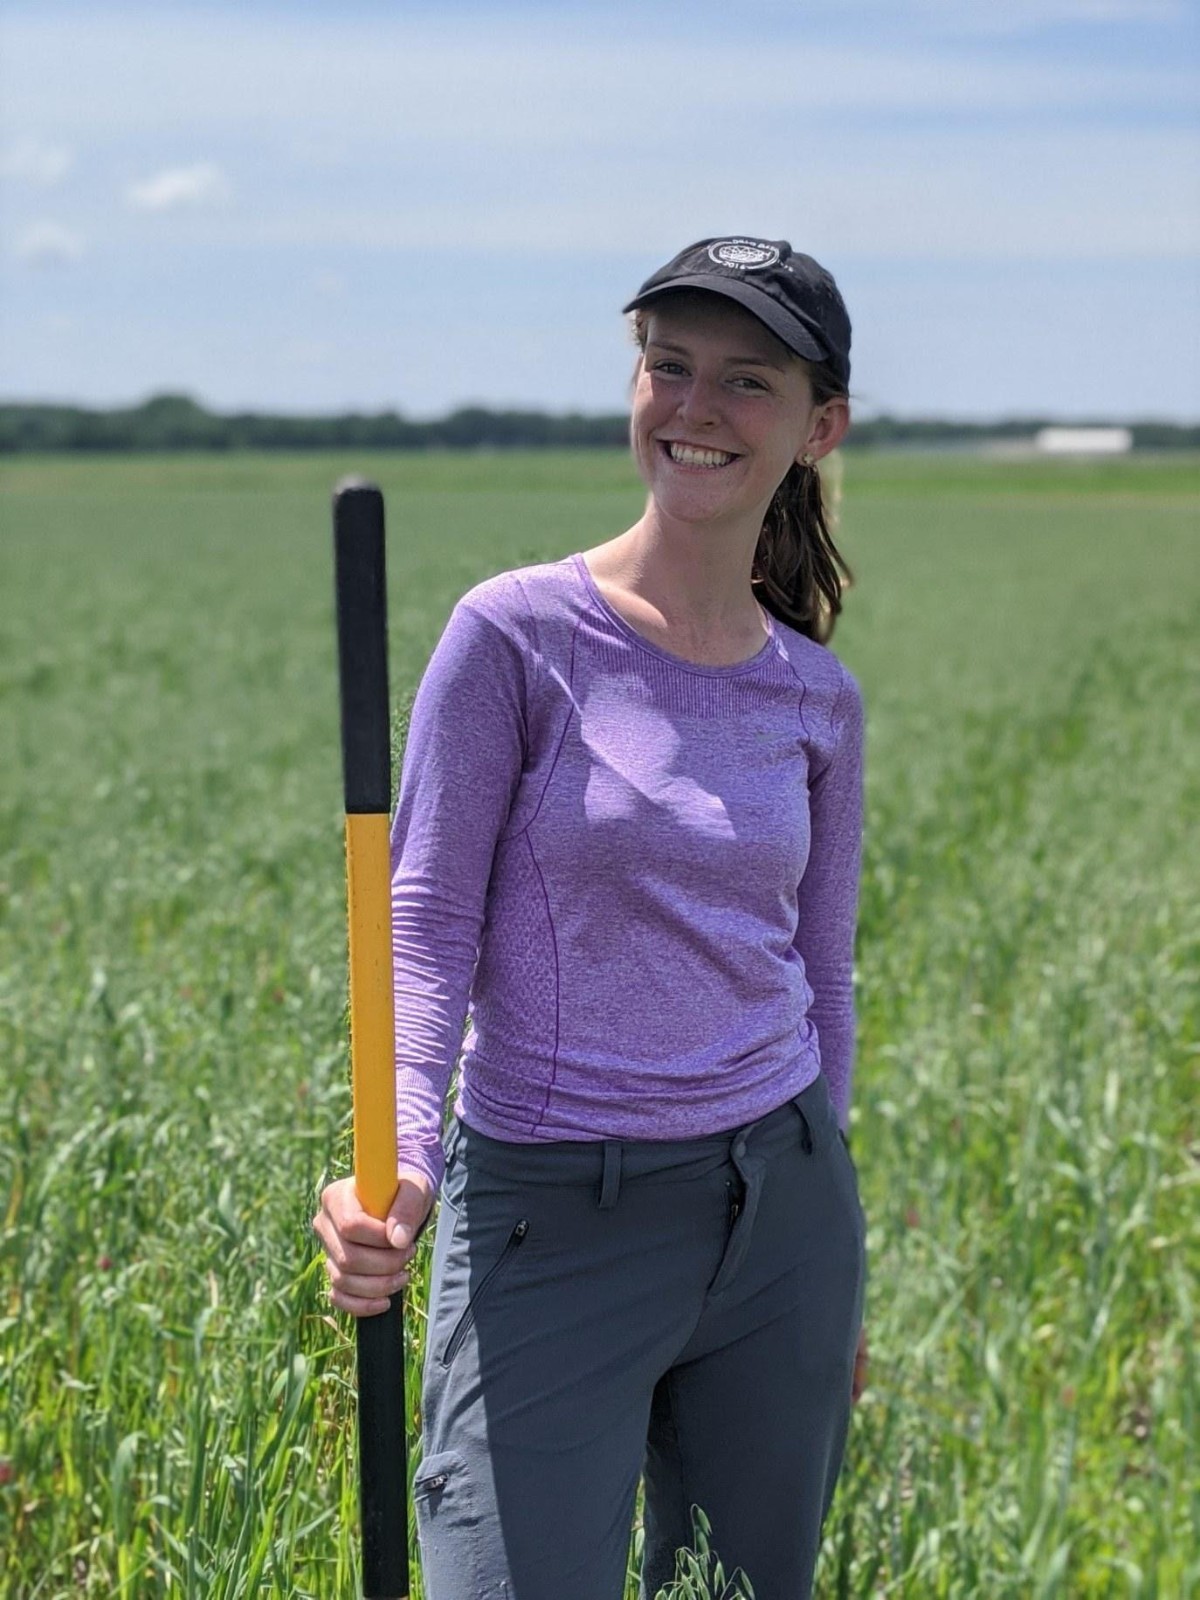 Rebecca smiling while holding a shovel and standing in a field of grassy cover crops